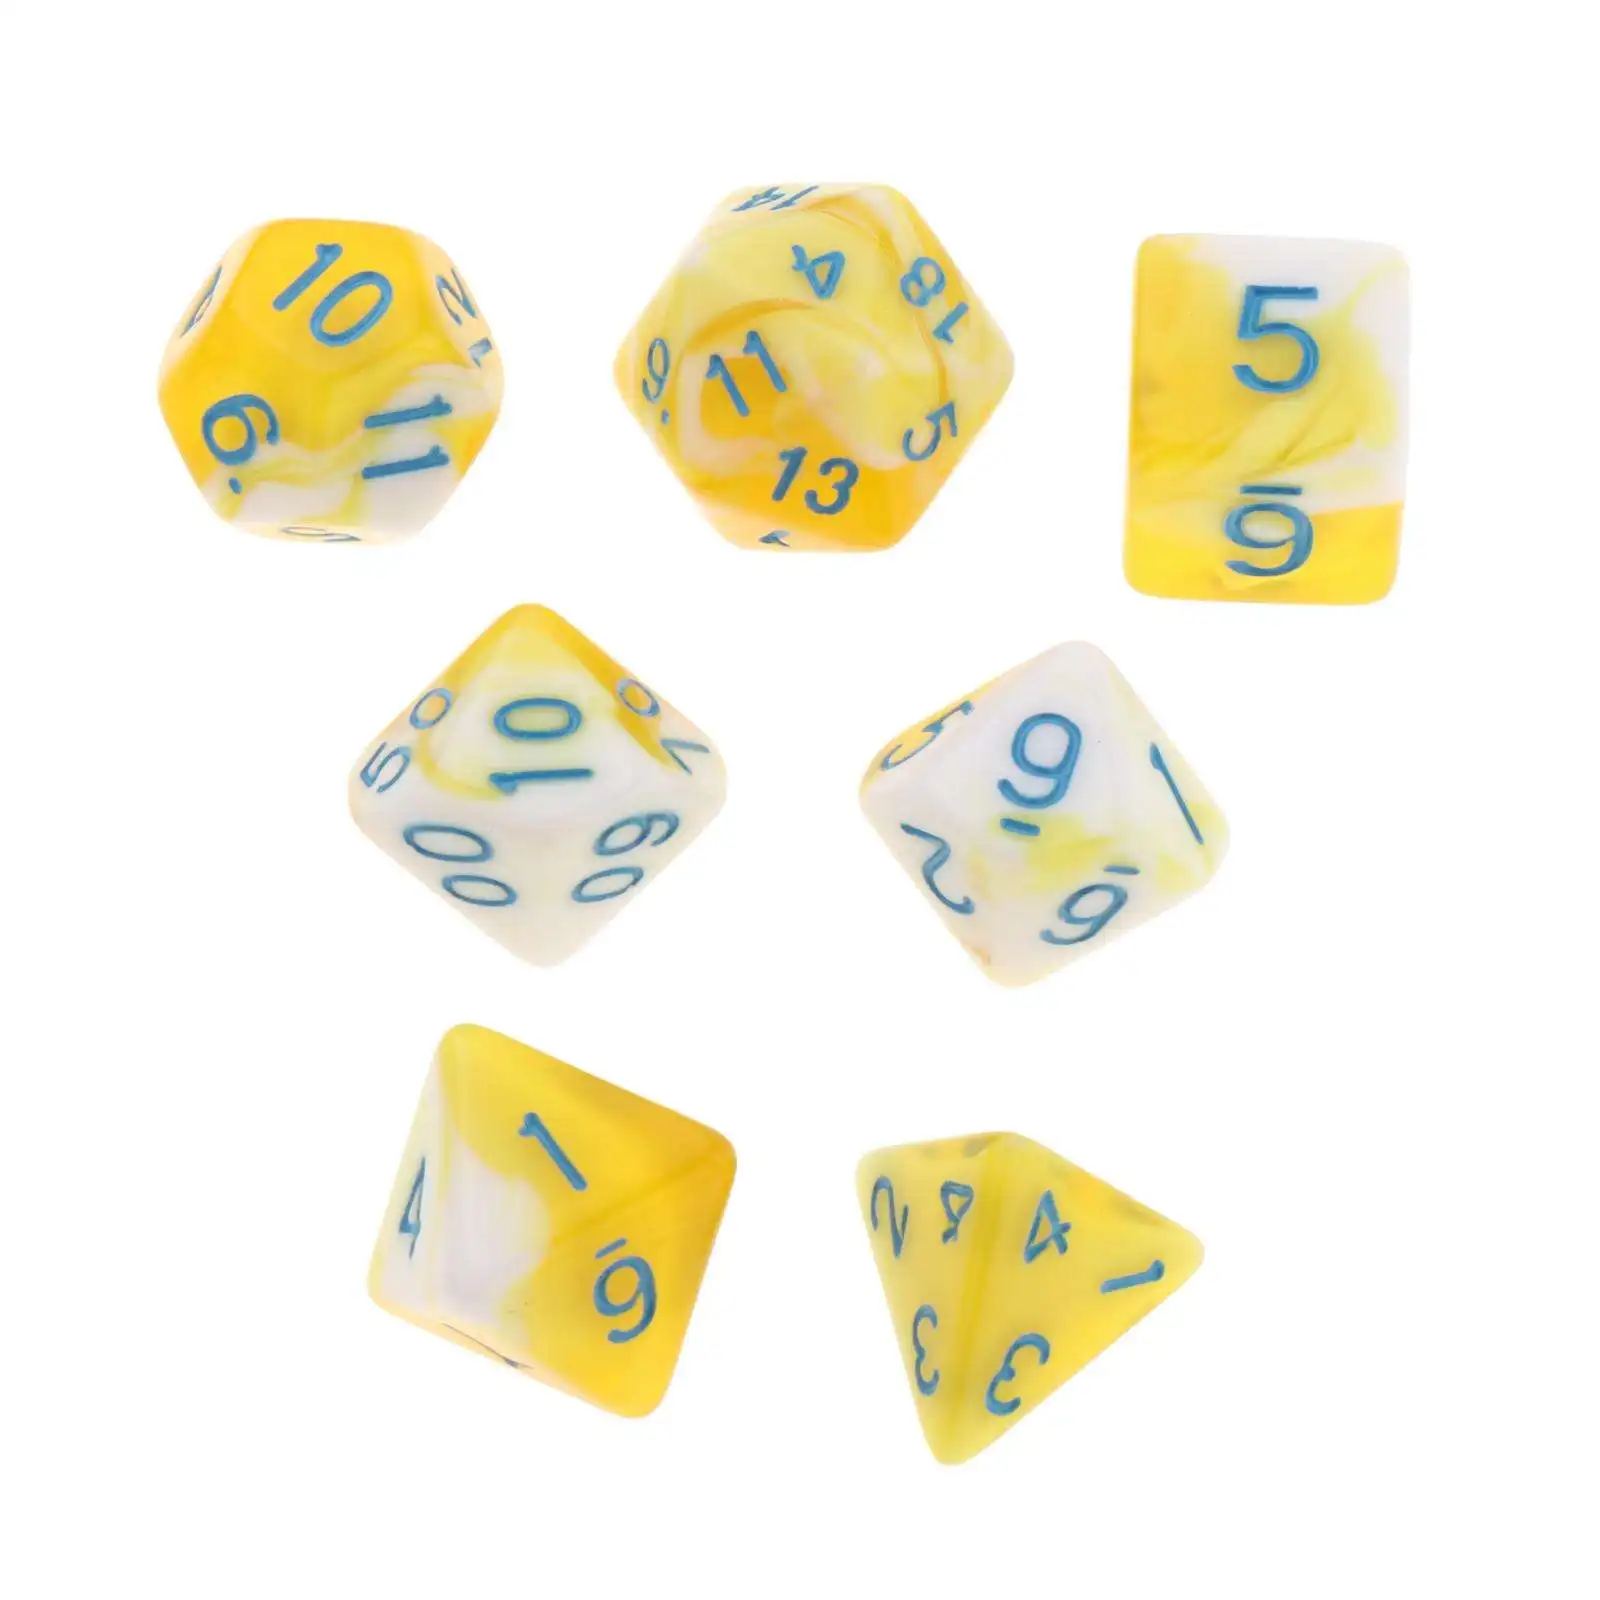 7 Pieces Polyhedral Dice Party Favors Casino Accessories Party Supply Rpg Dices Irregular Role Playing Dice for Dnd Rpg Mtg